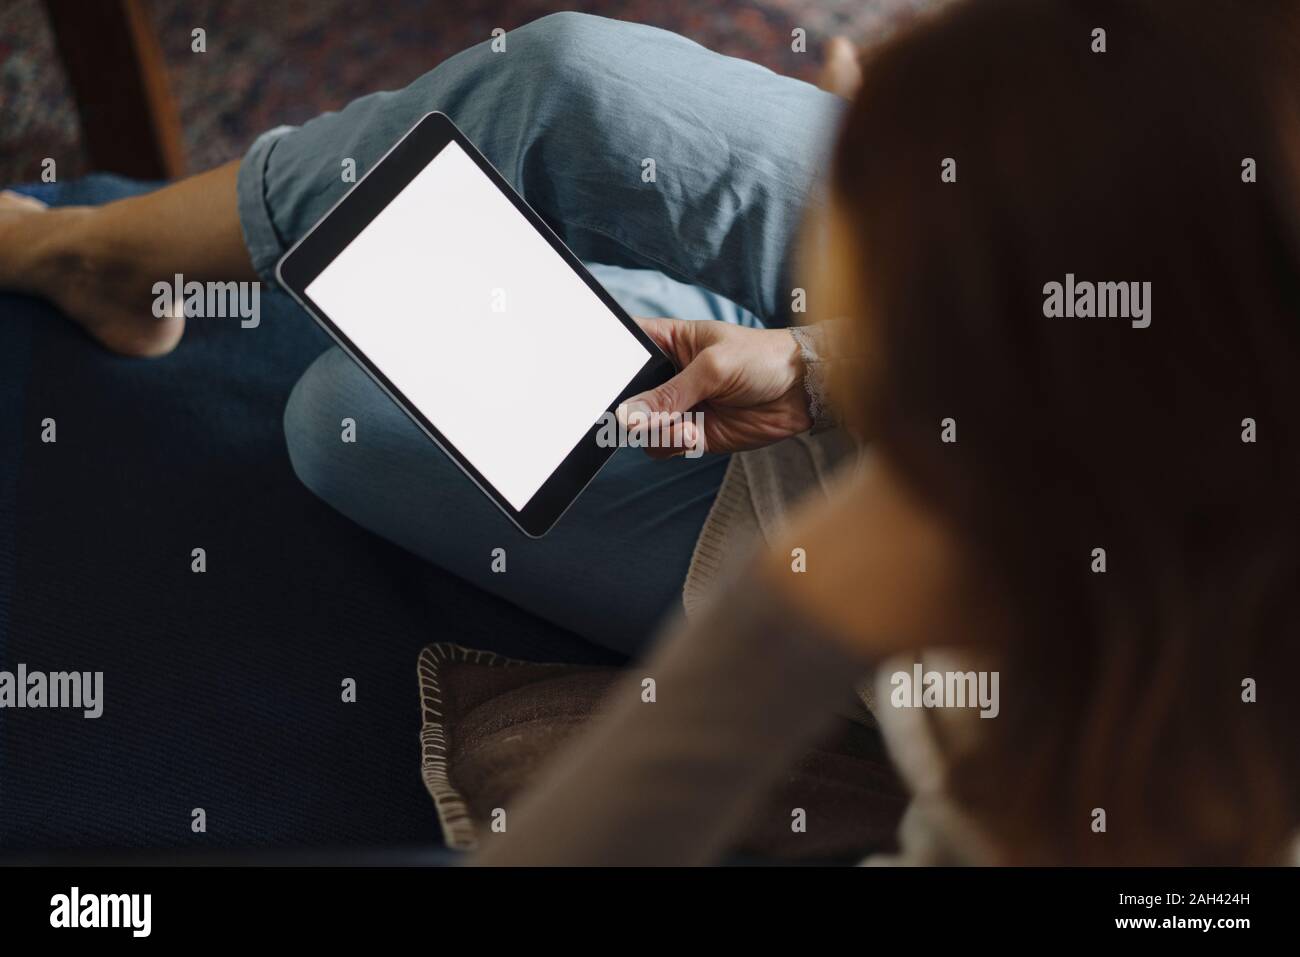 Woman sitting on couch, using digital tablet Banque D'Images